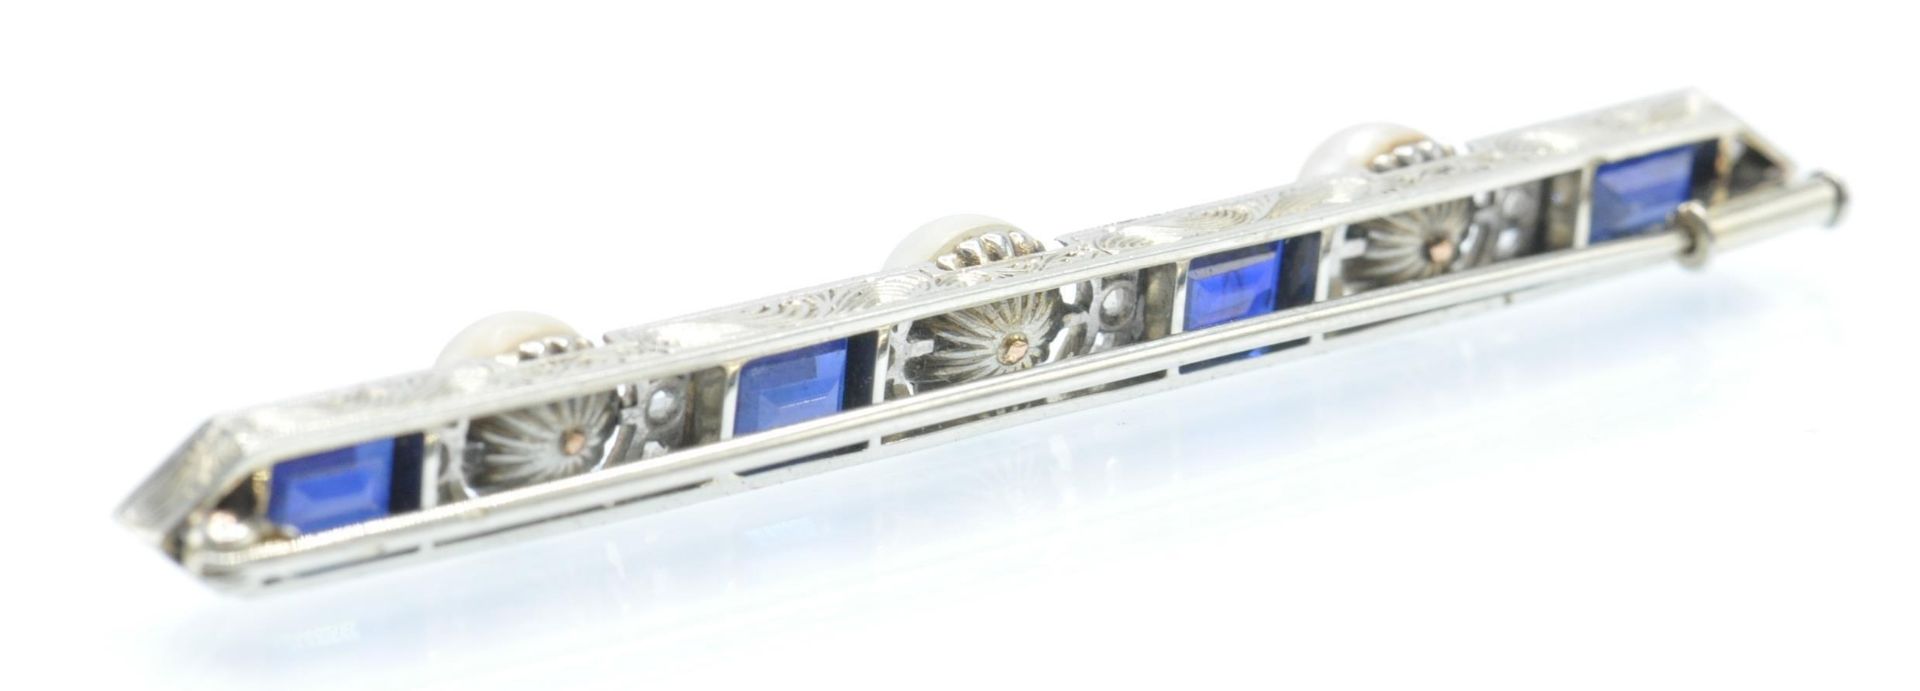 An Antique Gold Platinum, Sapphire Diamond & Pearl Brooch - Image 2 of 6